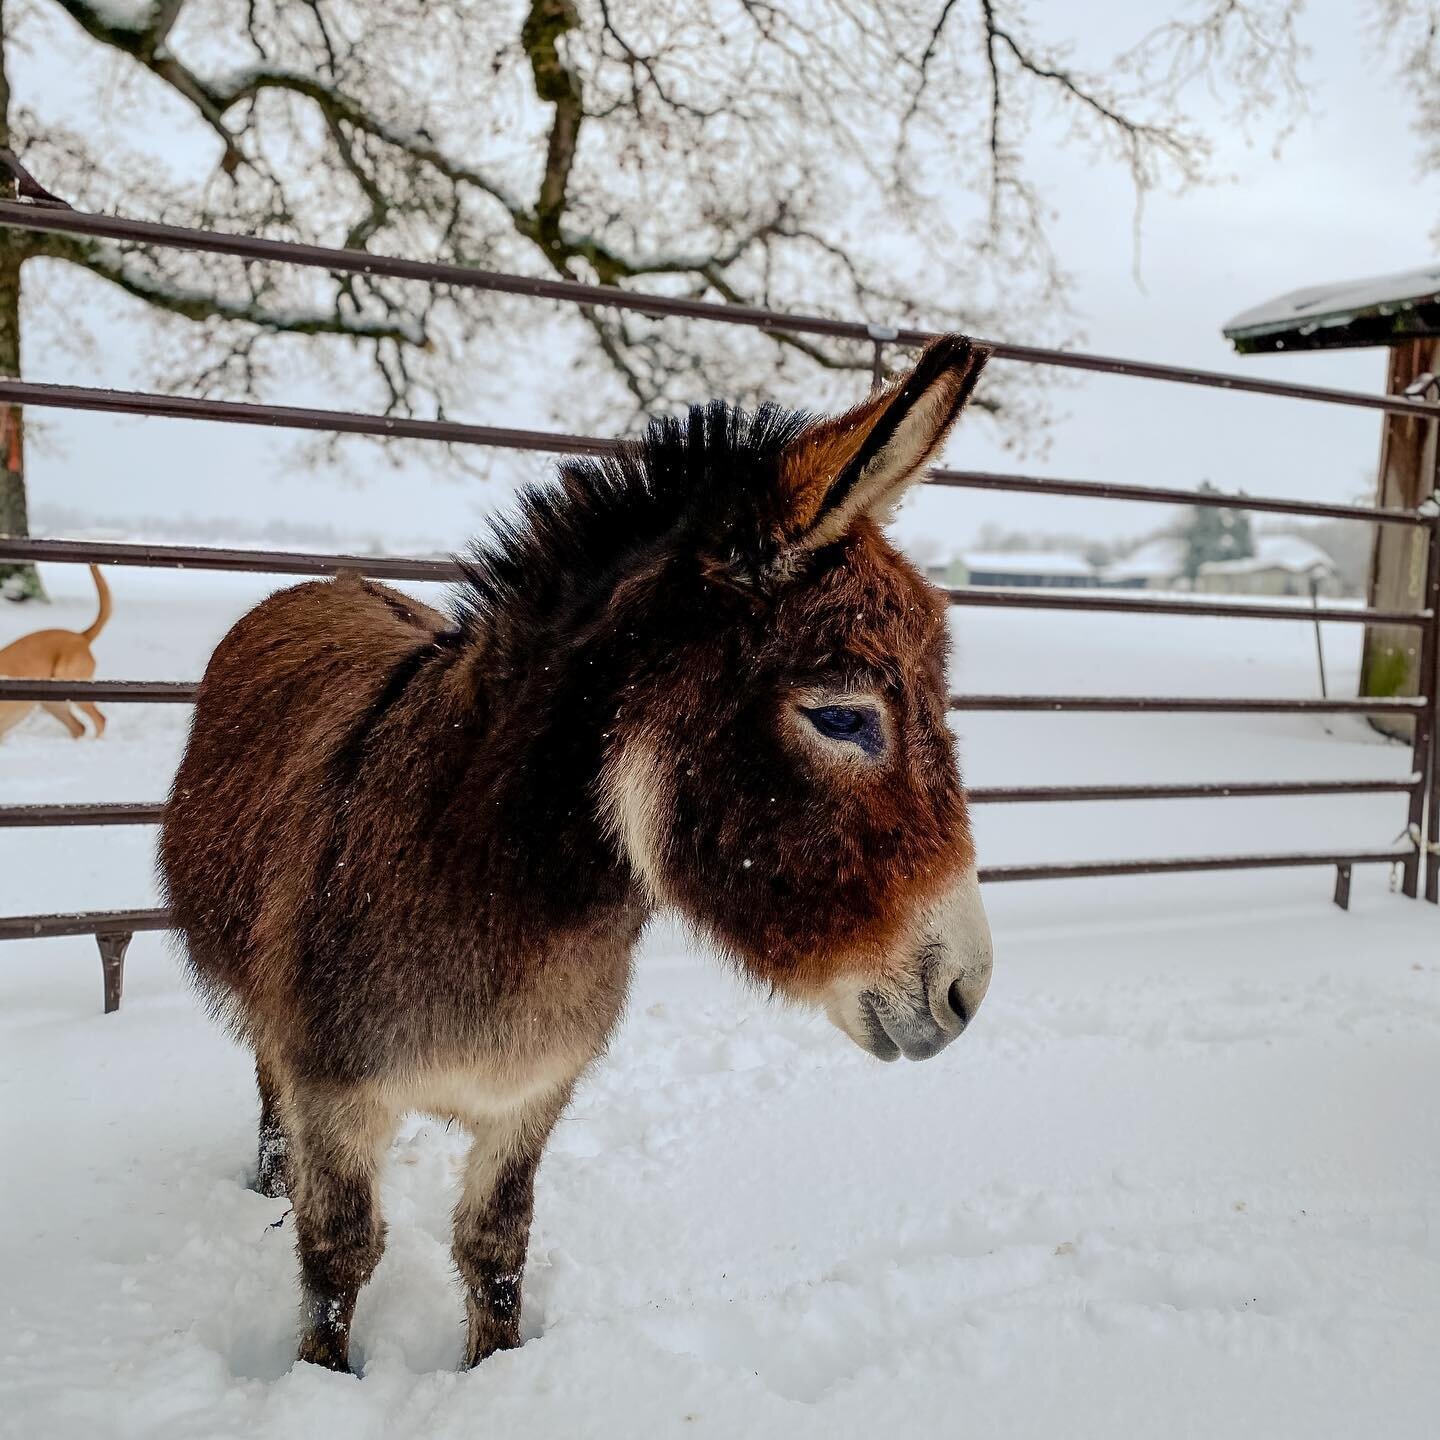 The snow was loved by some, tolerated by most and deeply despised by the donkeys. 

Now for the great thaw.

We are holding all those who are affected by this polar vortex in our hearts, especially those working hard to keep livestock fed, watered an